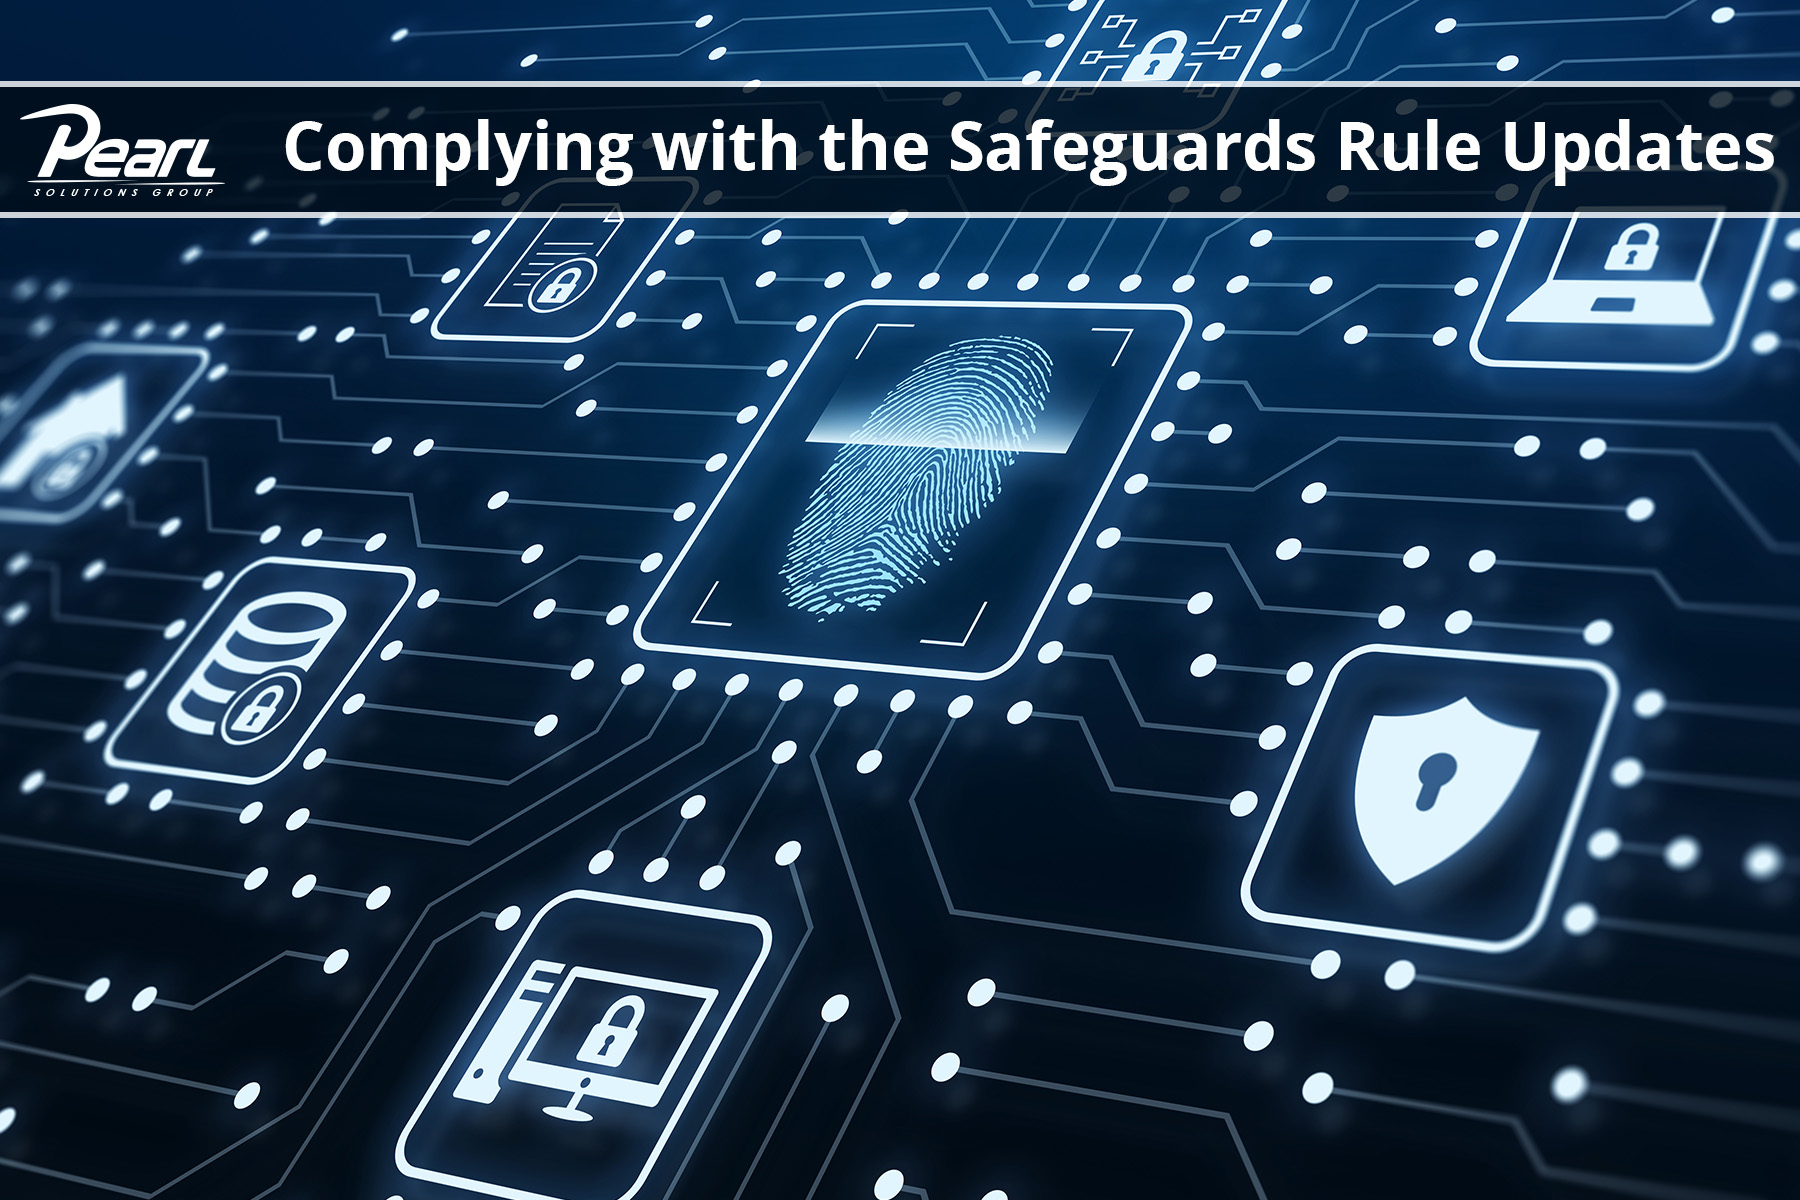 Complying with the Safeguards Rule Updates